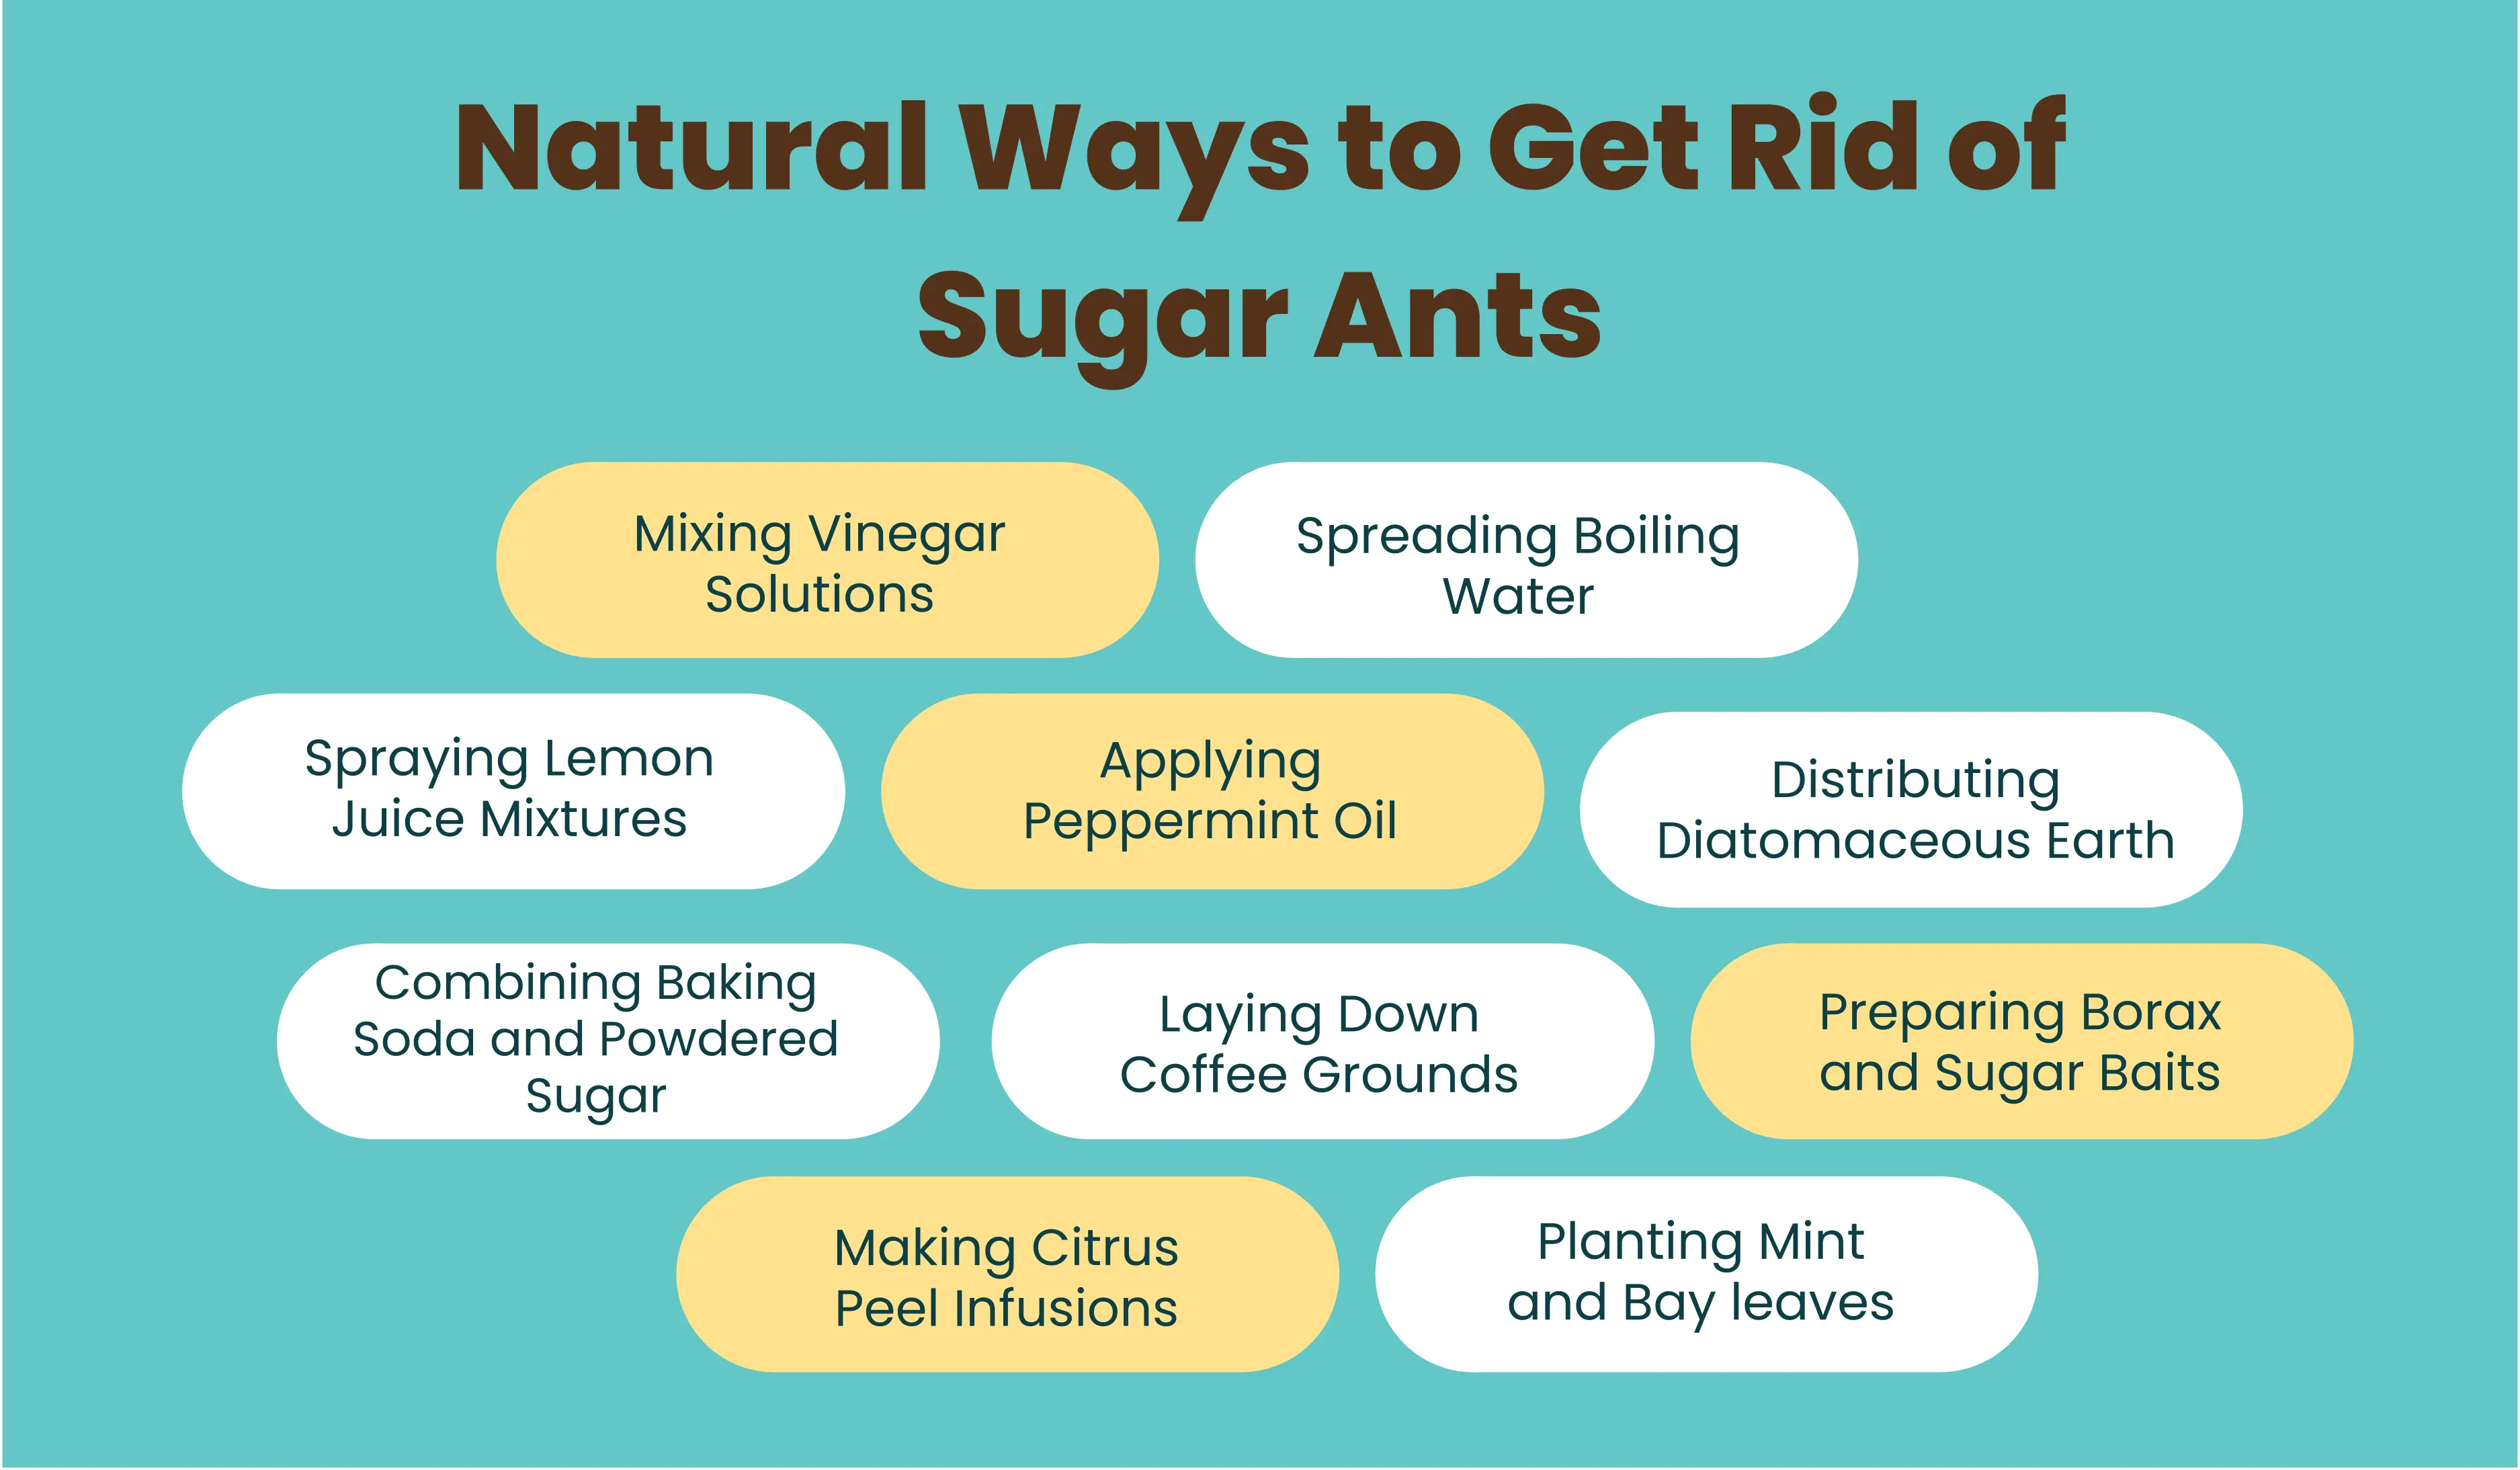 natural ways to get rid of sugar ants graphic showing list